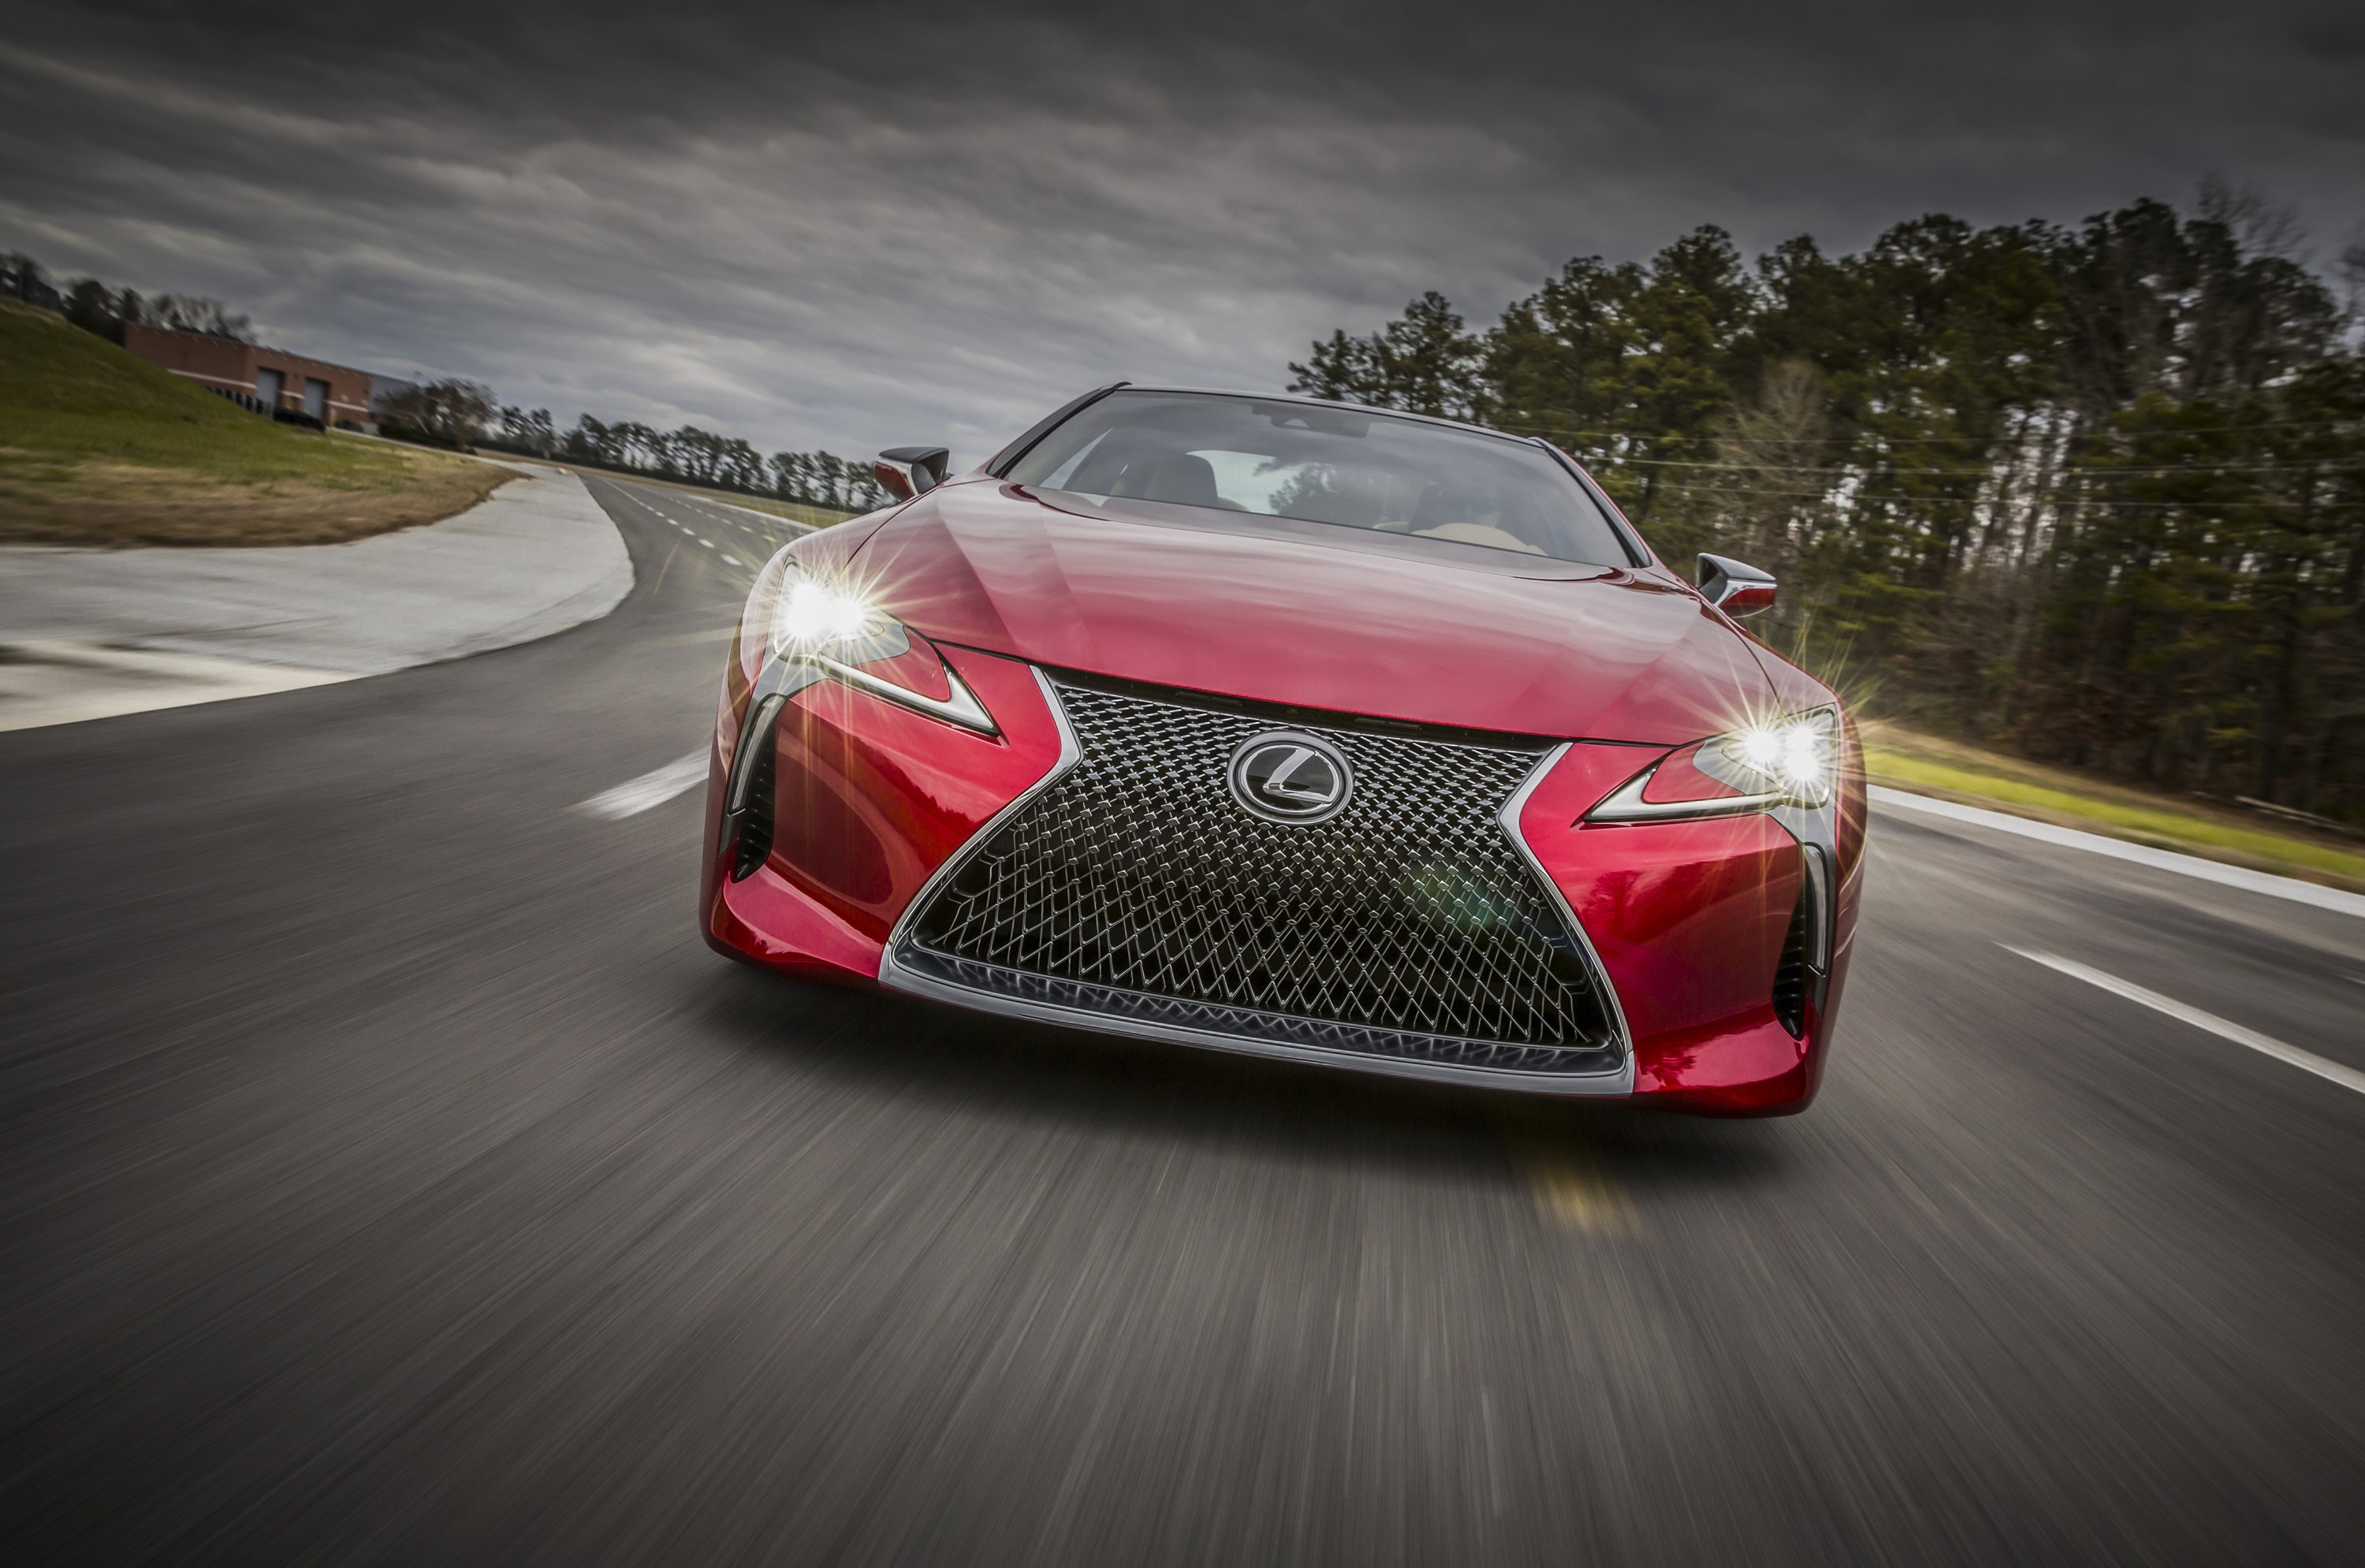 The Lexus LC 500 is a big, powerful, flagship coupe